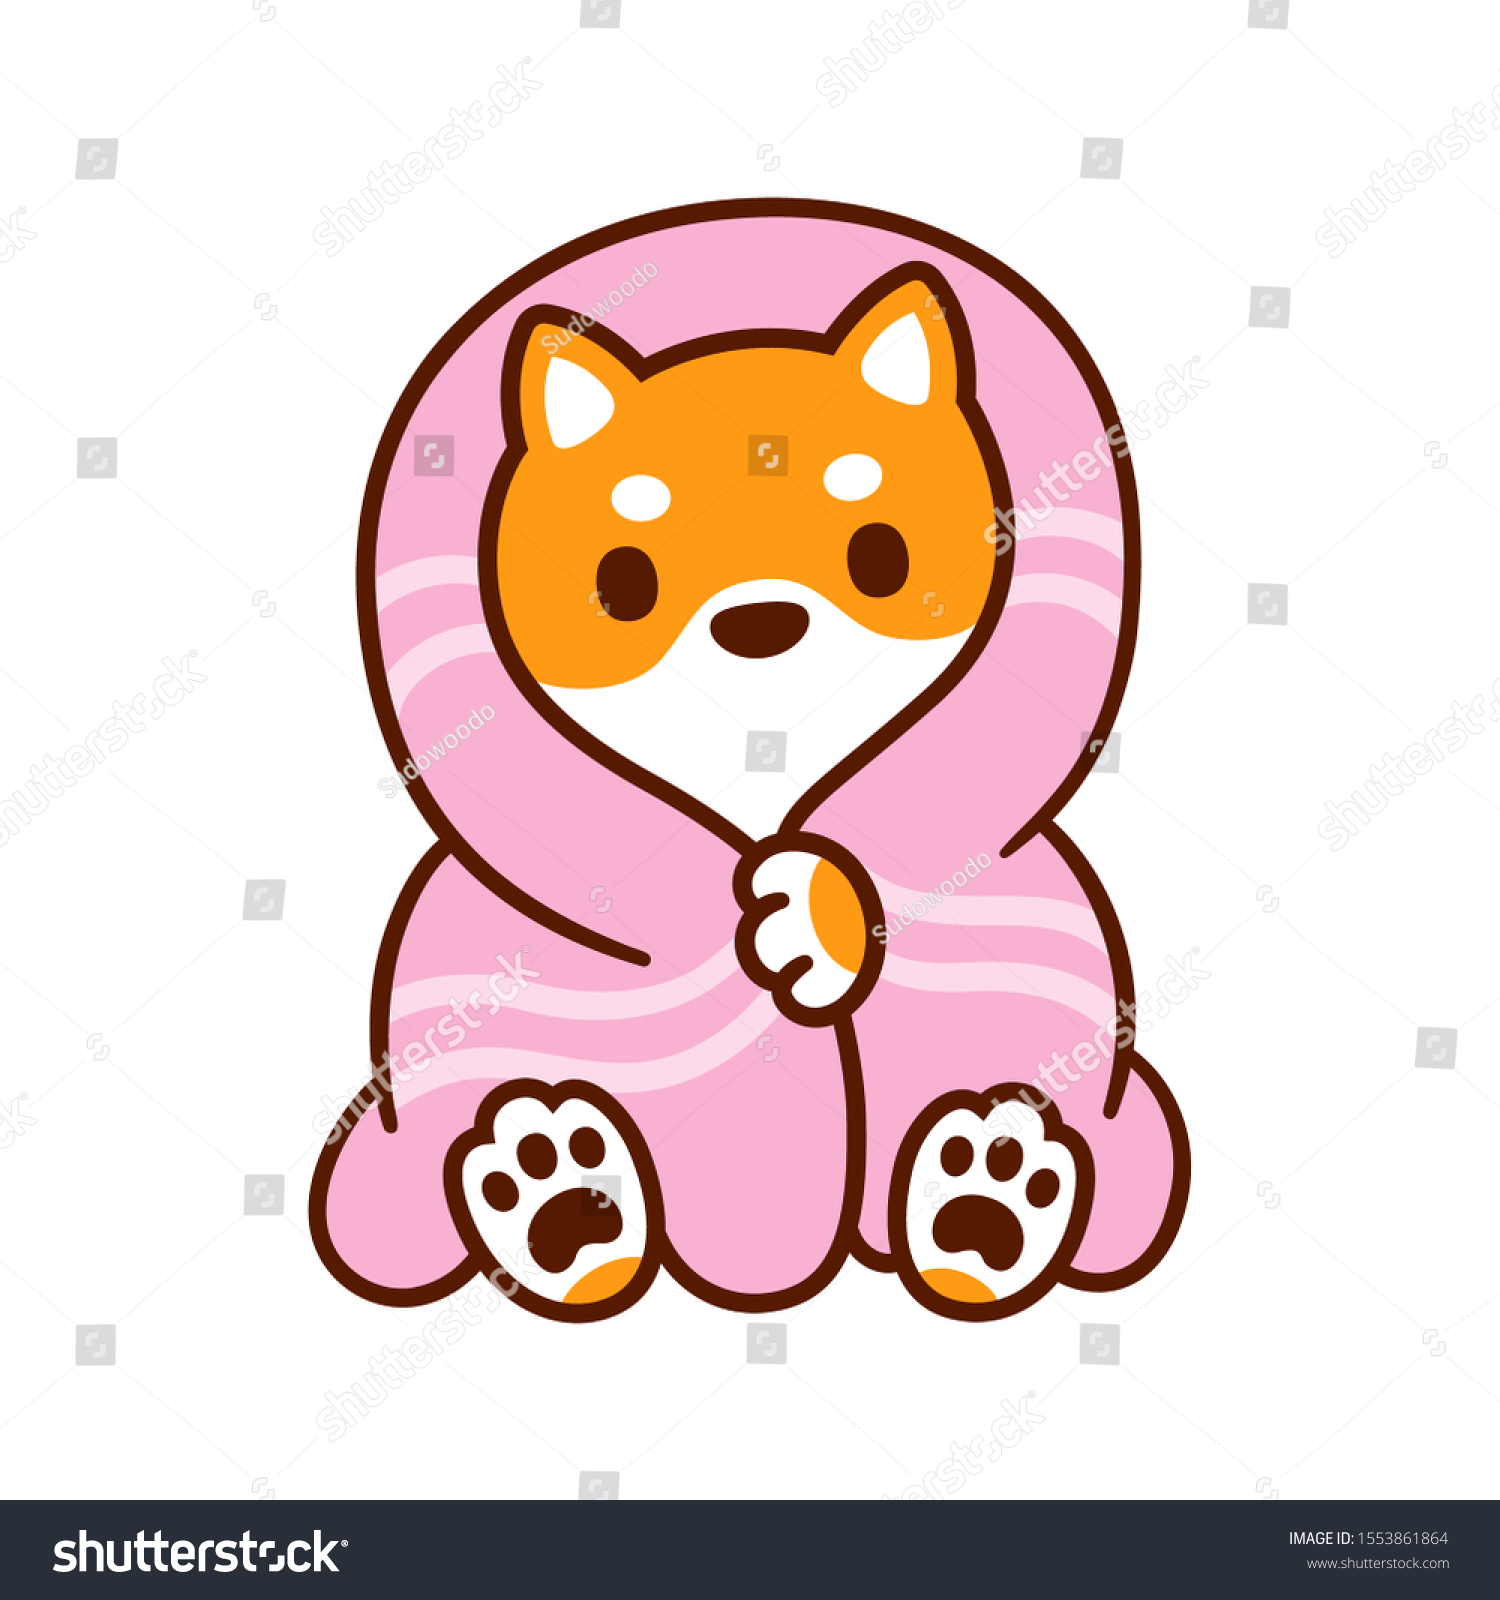 Cute Cartoon Shiba Inu Dog Gift Fuzzy Lightweight Comfortable Warm Blanket for Couch Bed Sofa 60x50 